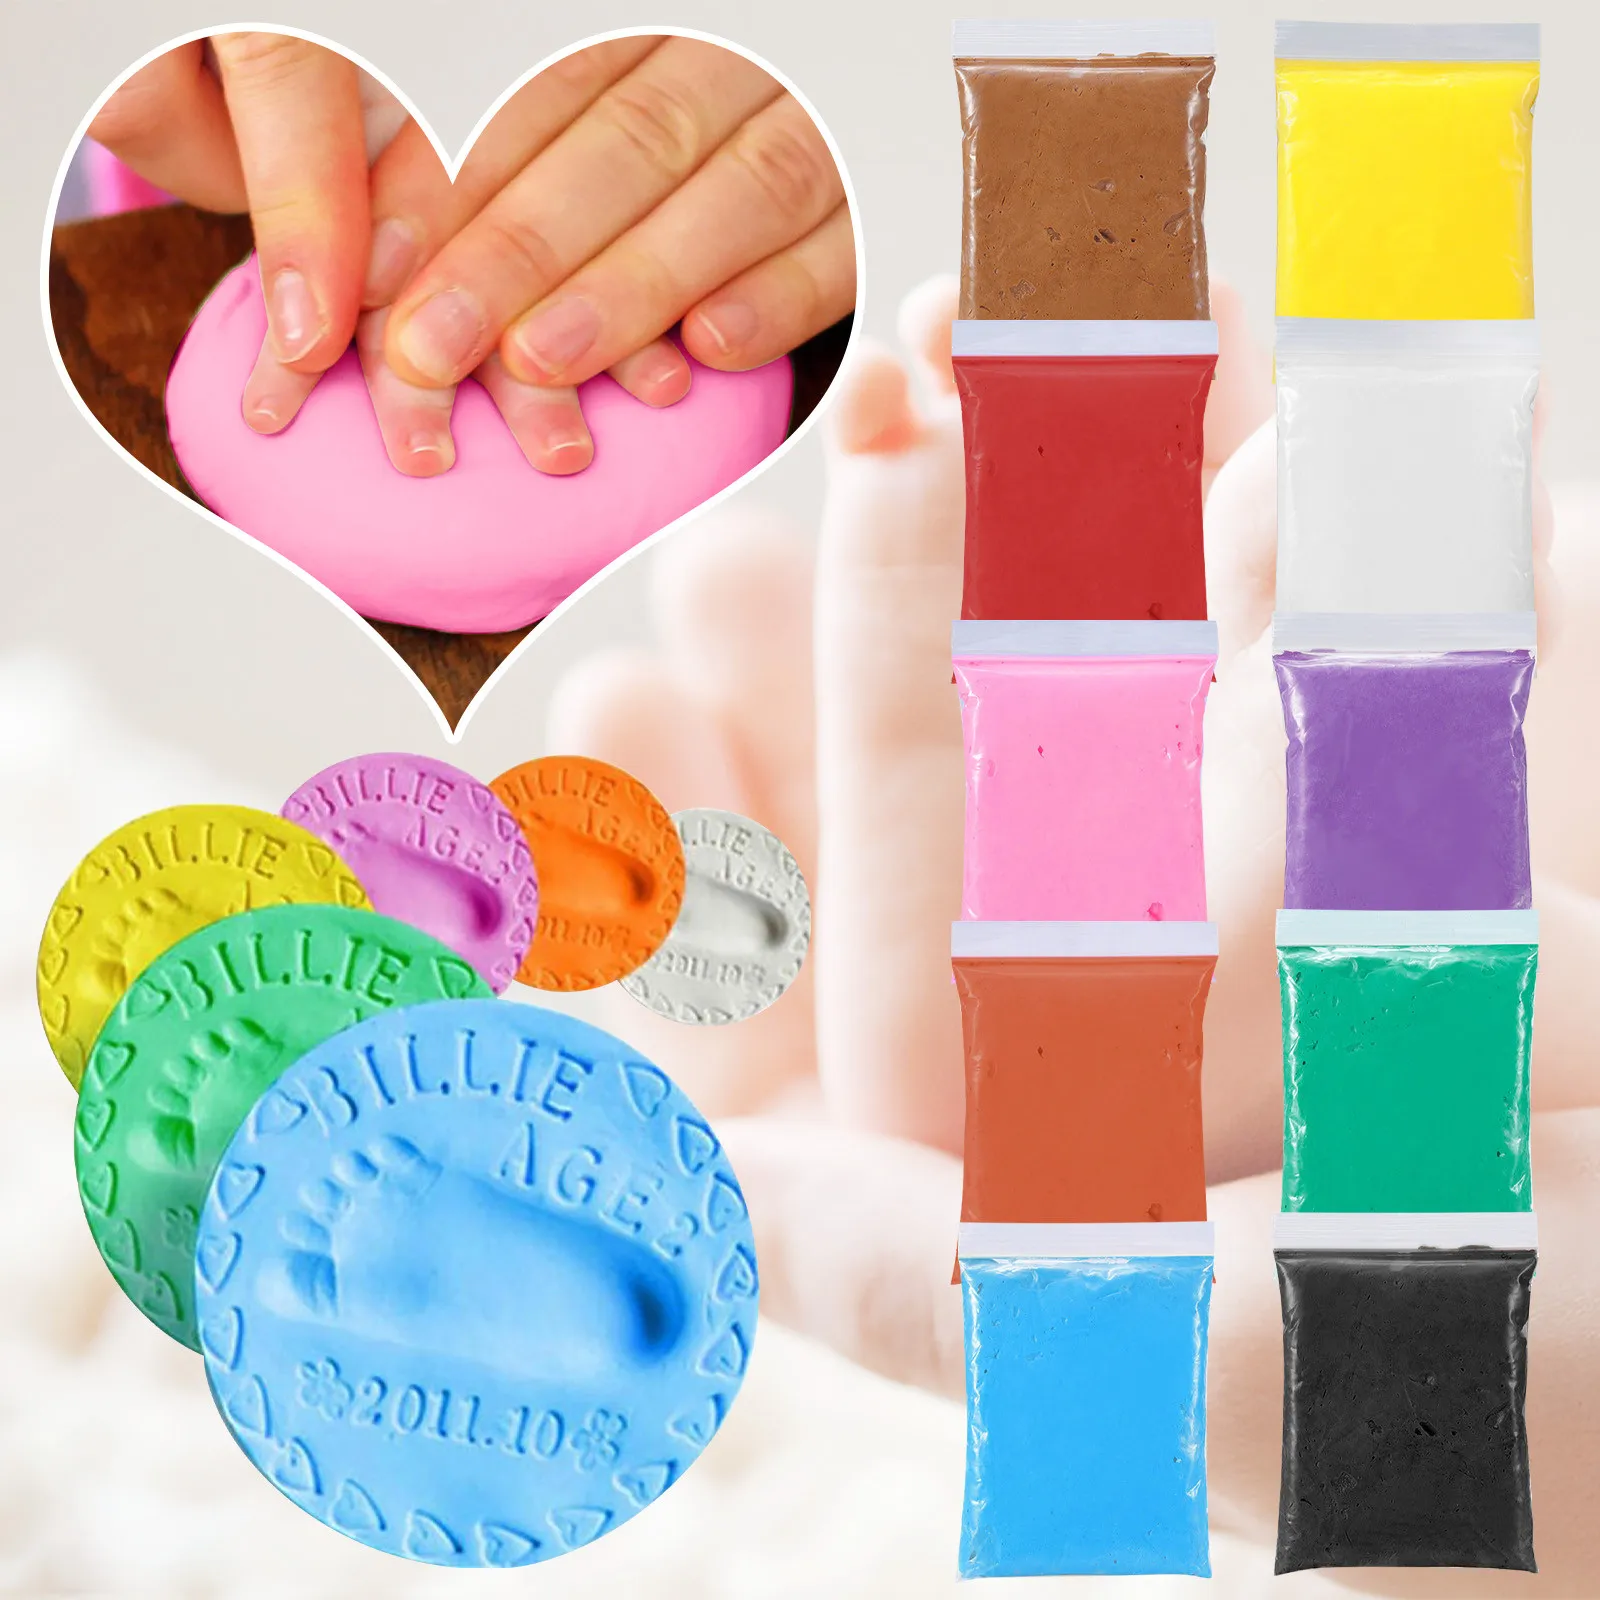 Baby Hand/Foot Print Imprint Air Drying Clay Casting Kit Ornament Gift Hot Sale 